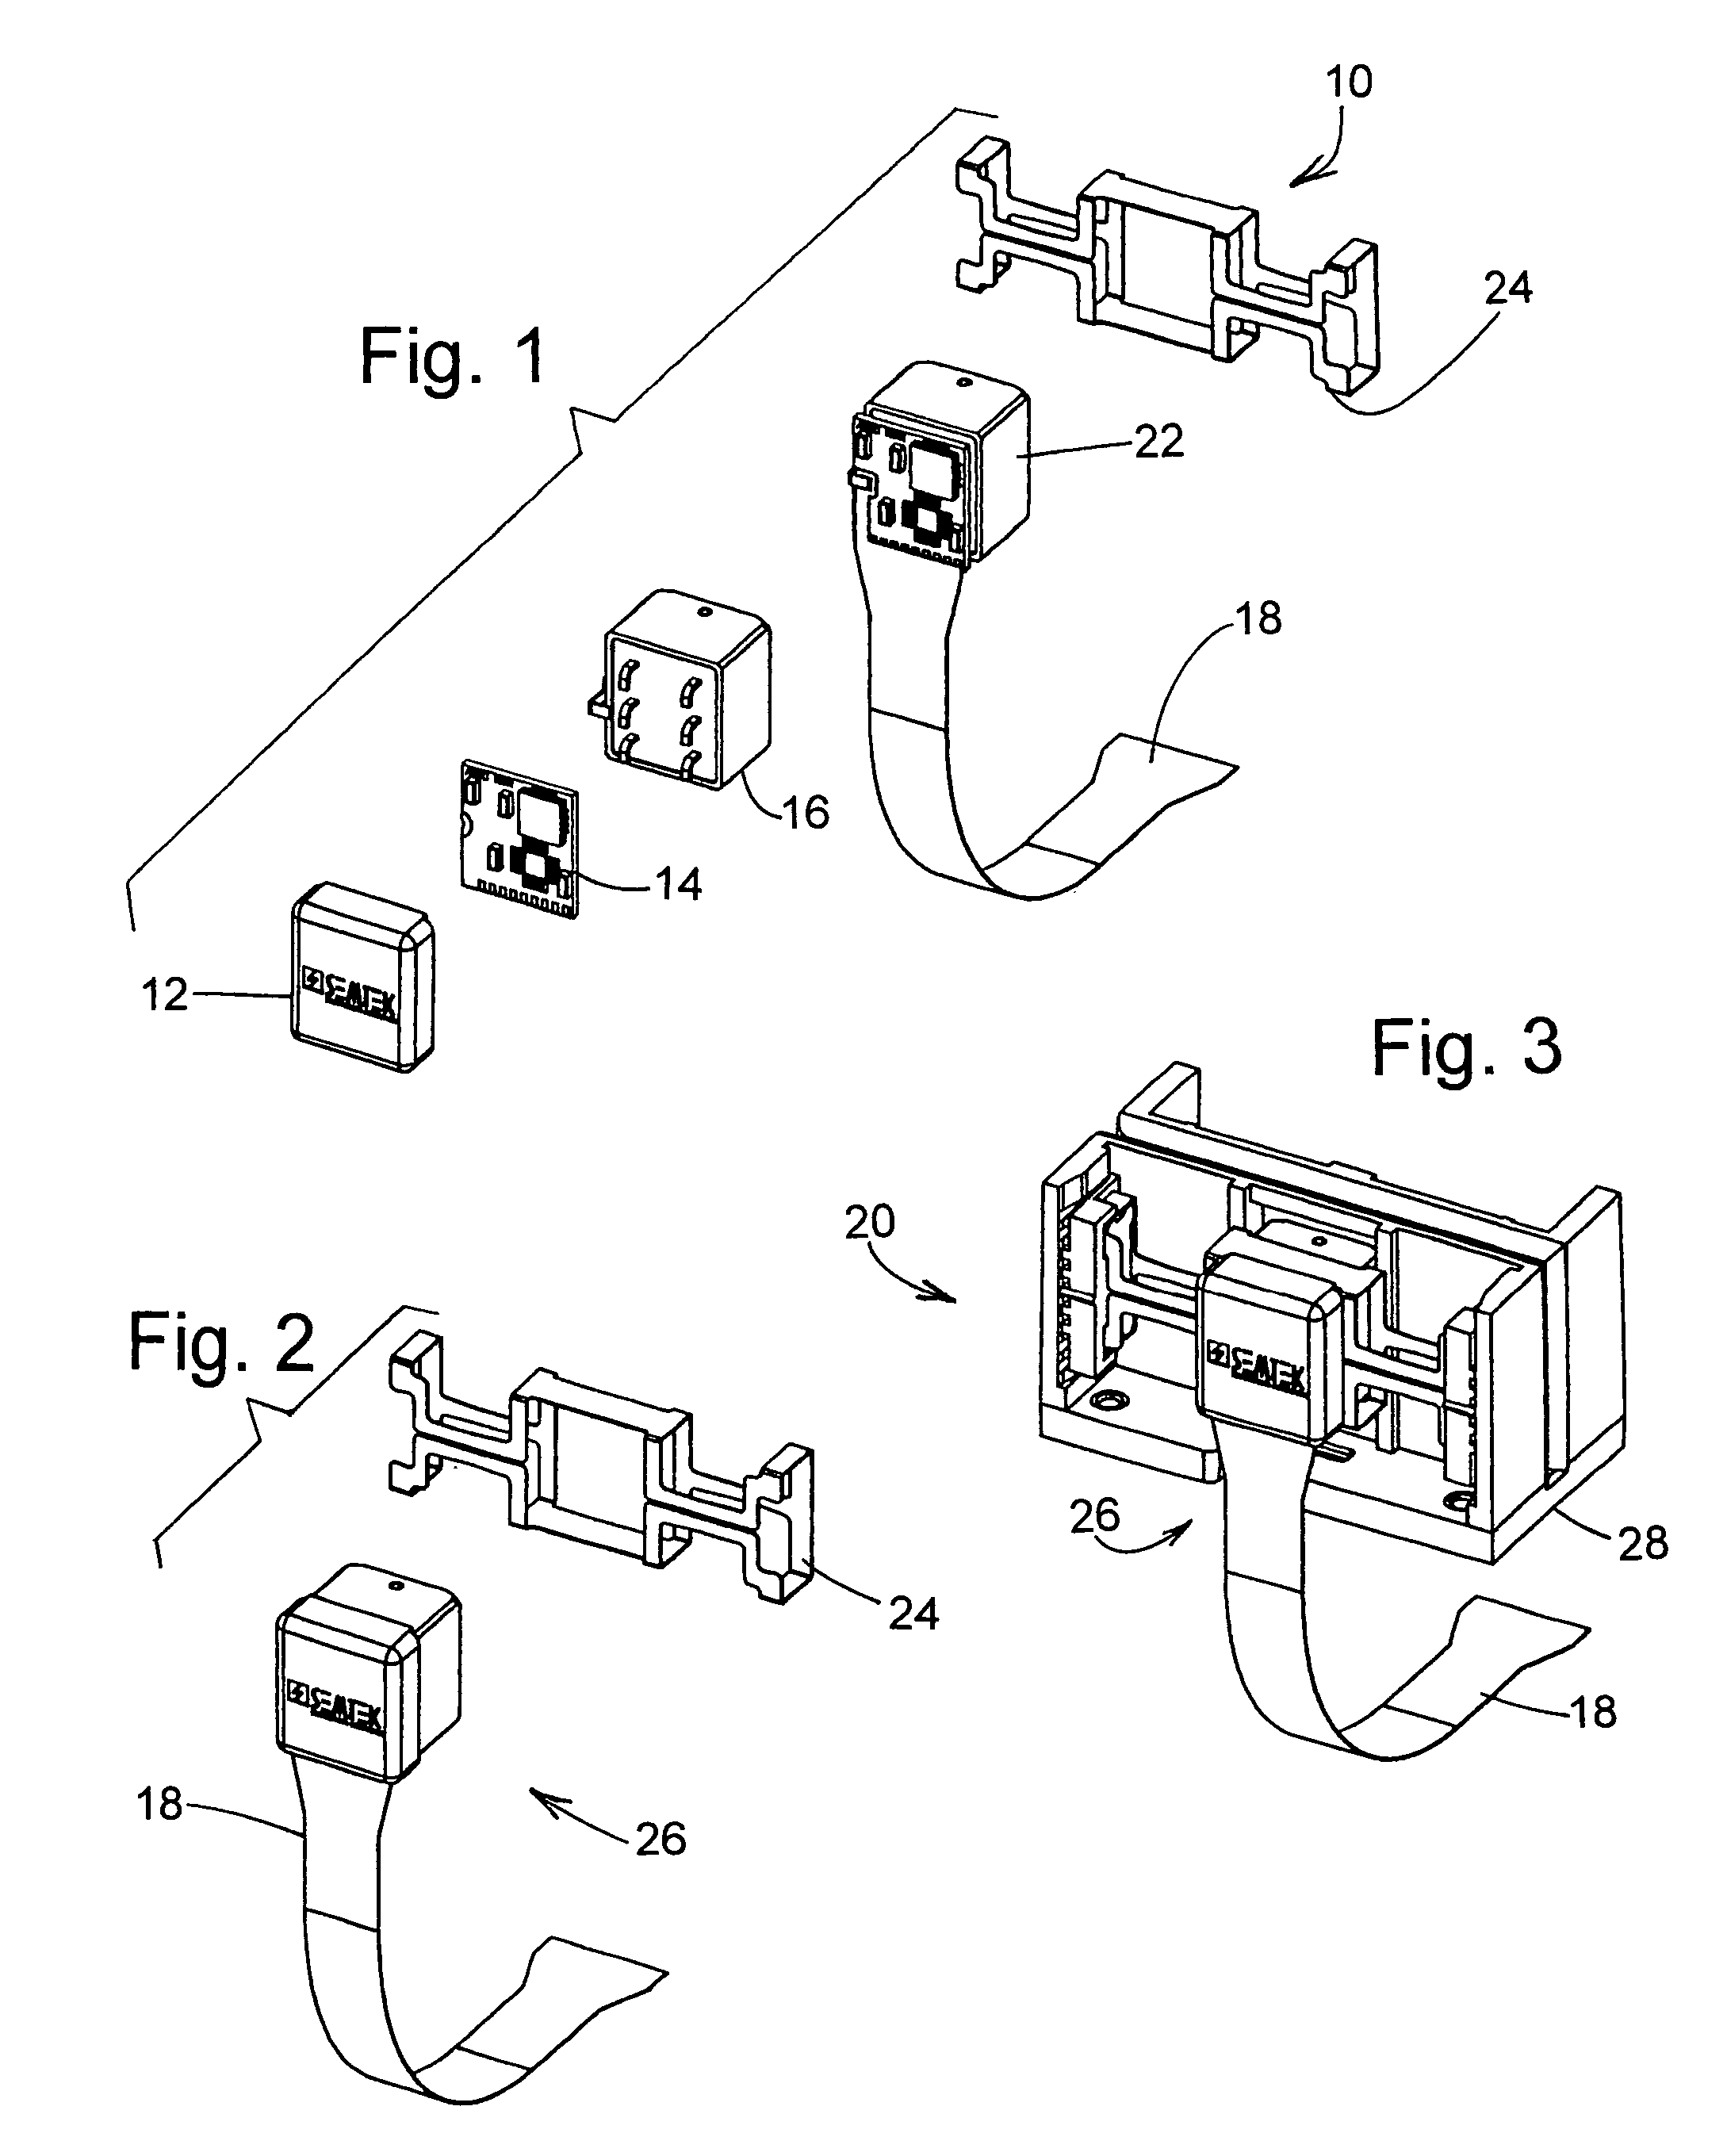 Secure magnetic stripe reader for handheld computing and method of using same